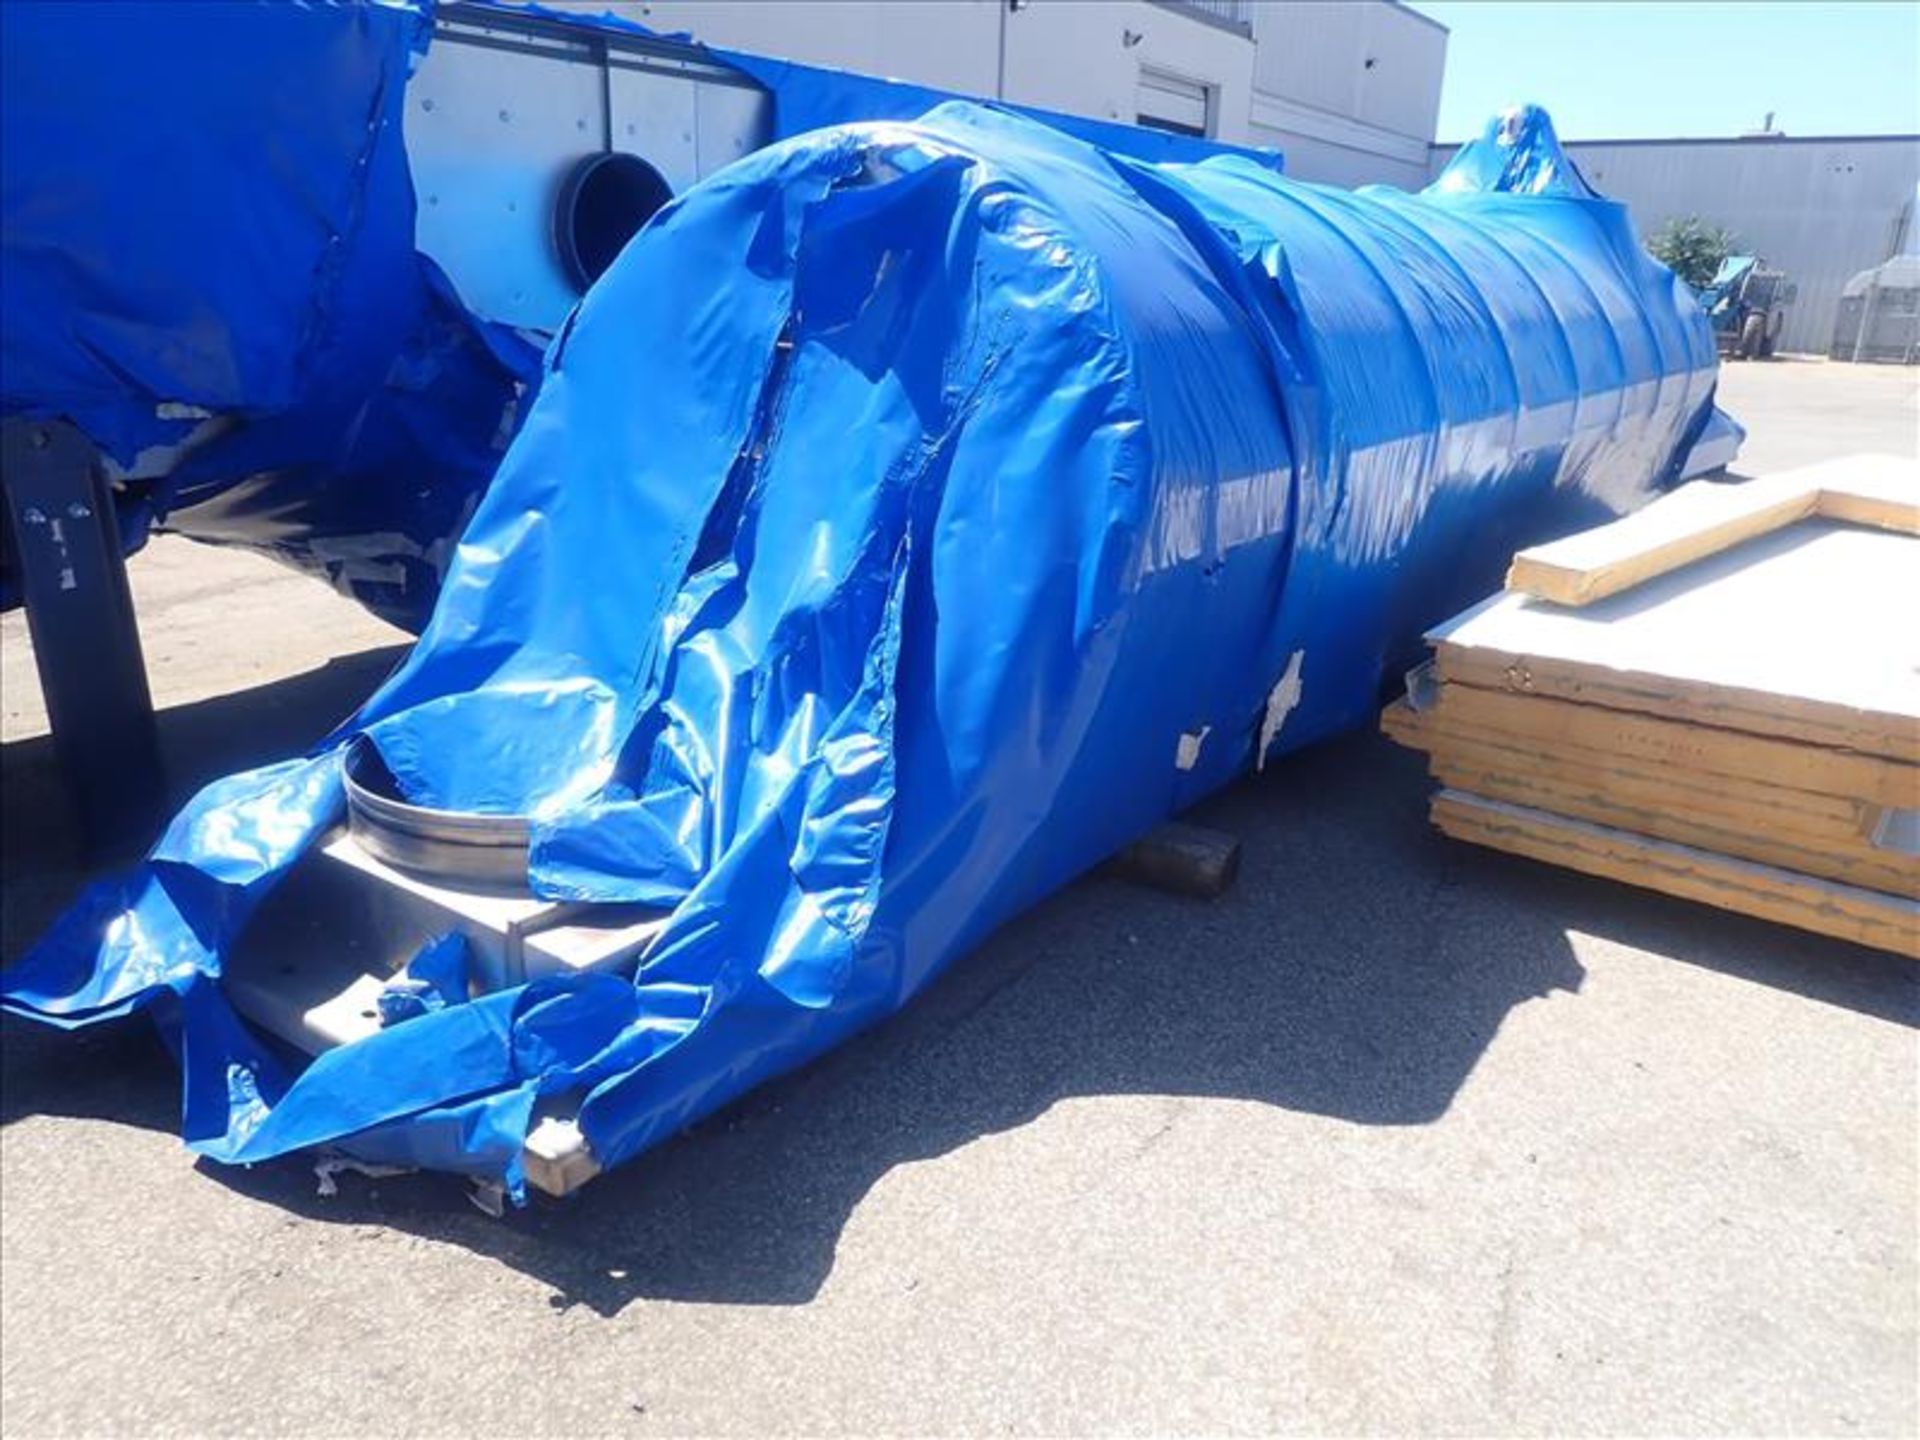 Carrier Vibratory Fluid Bed Dryer, model QAD-6080S-29'-4"-(2) S/N 29472-AE1, 10hp - Image 5 of 8